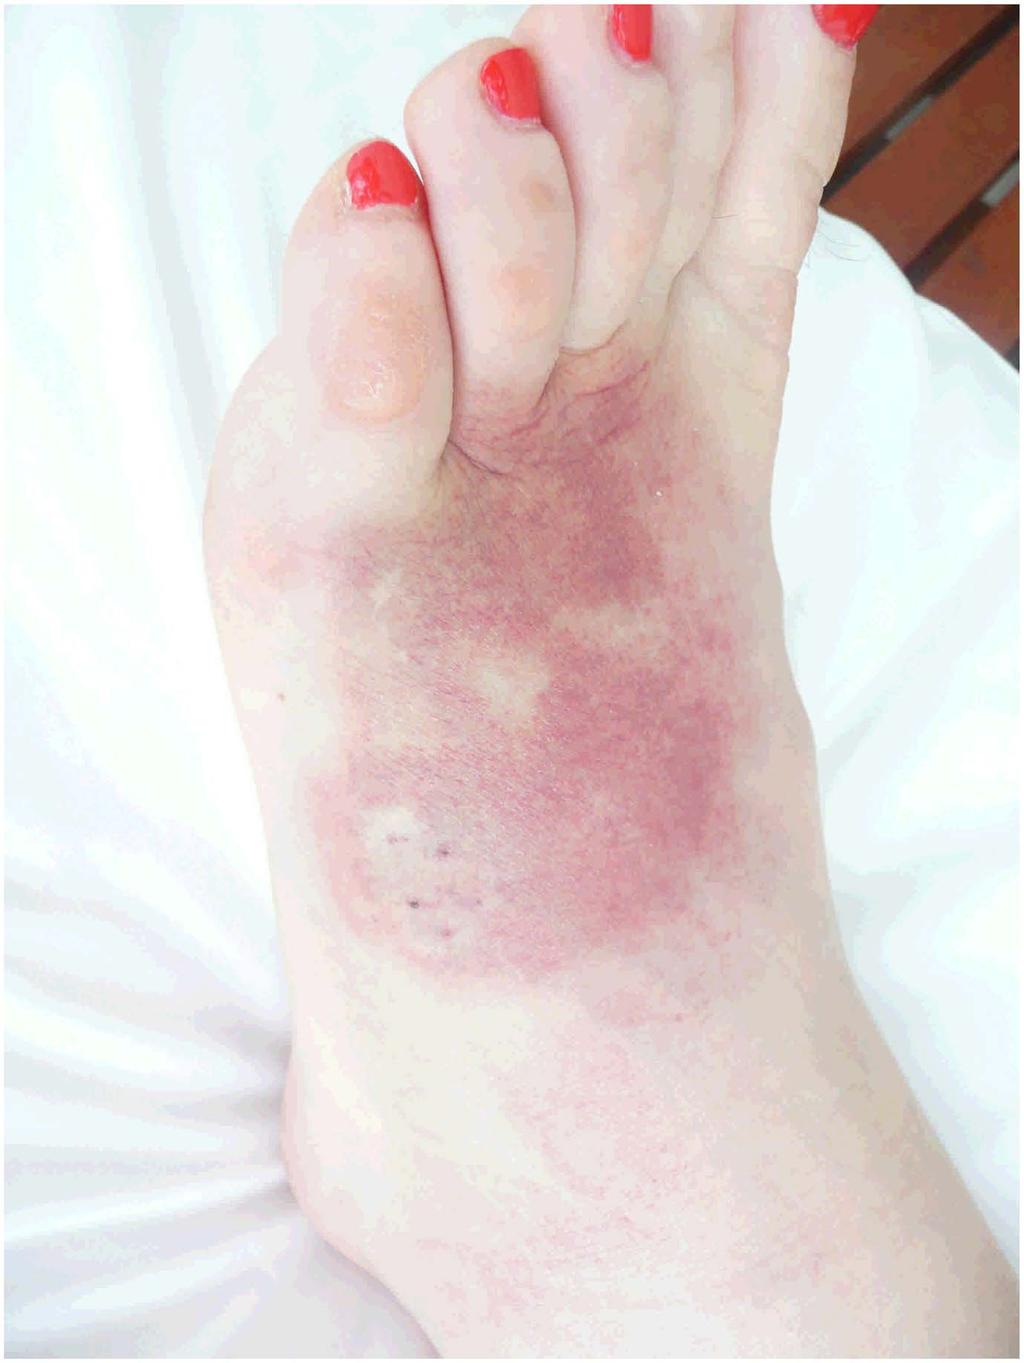 Figure 2. Local effects from a death adder bite to the foot. doi:10.1371/journal.pntd.0001841.